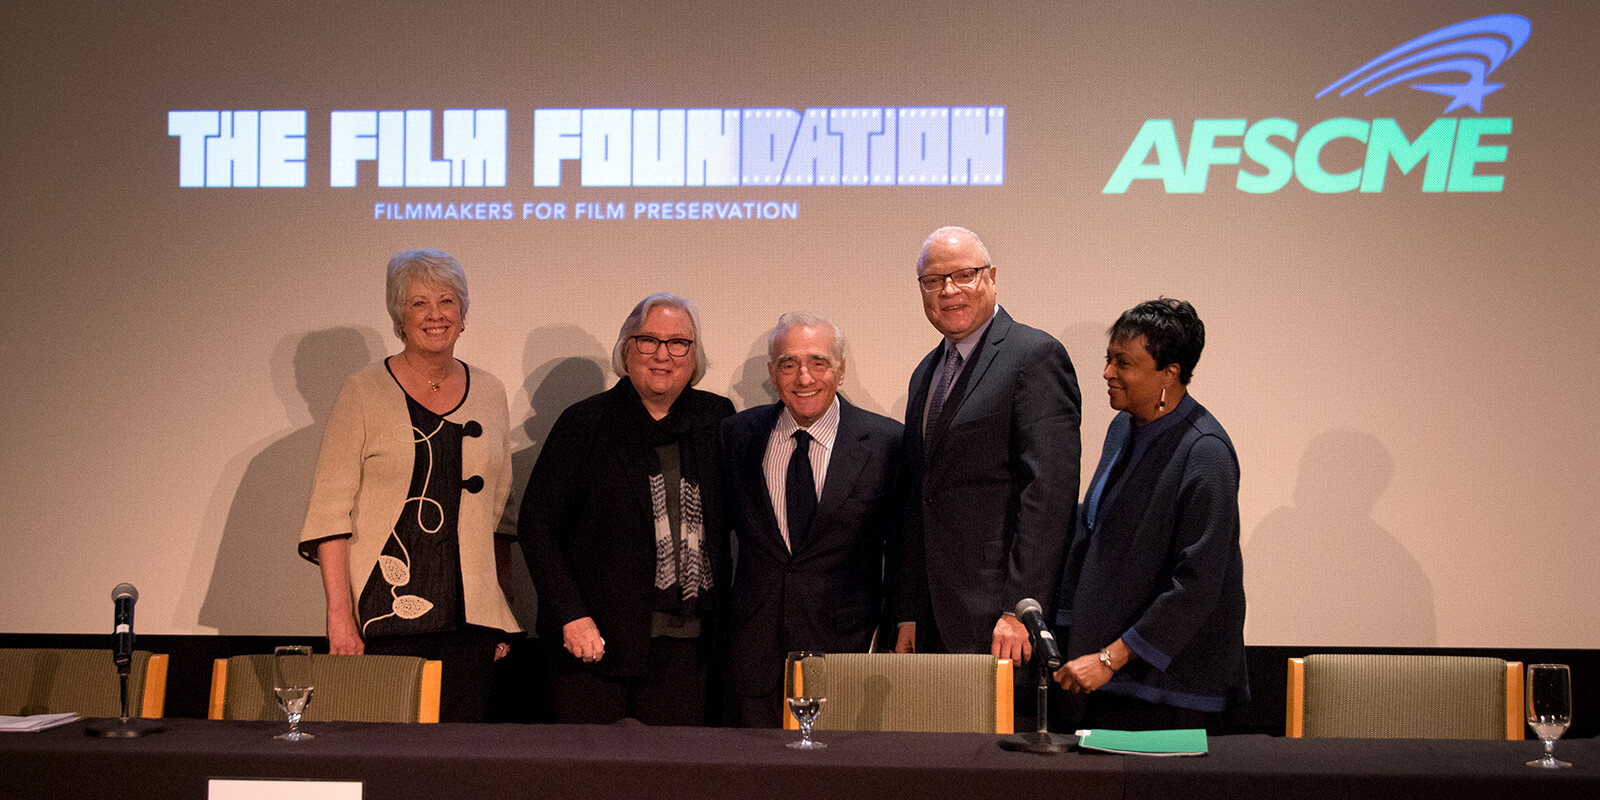 AFSCME’s Partnership with The Film Foundation Engages Youths, Spotlights Workers